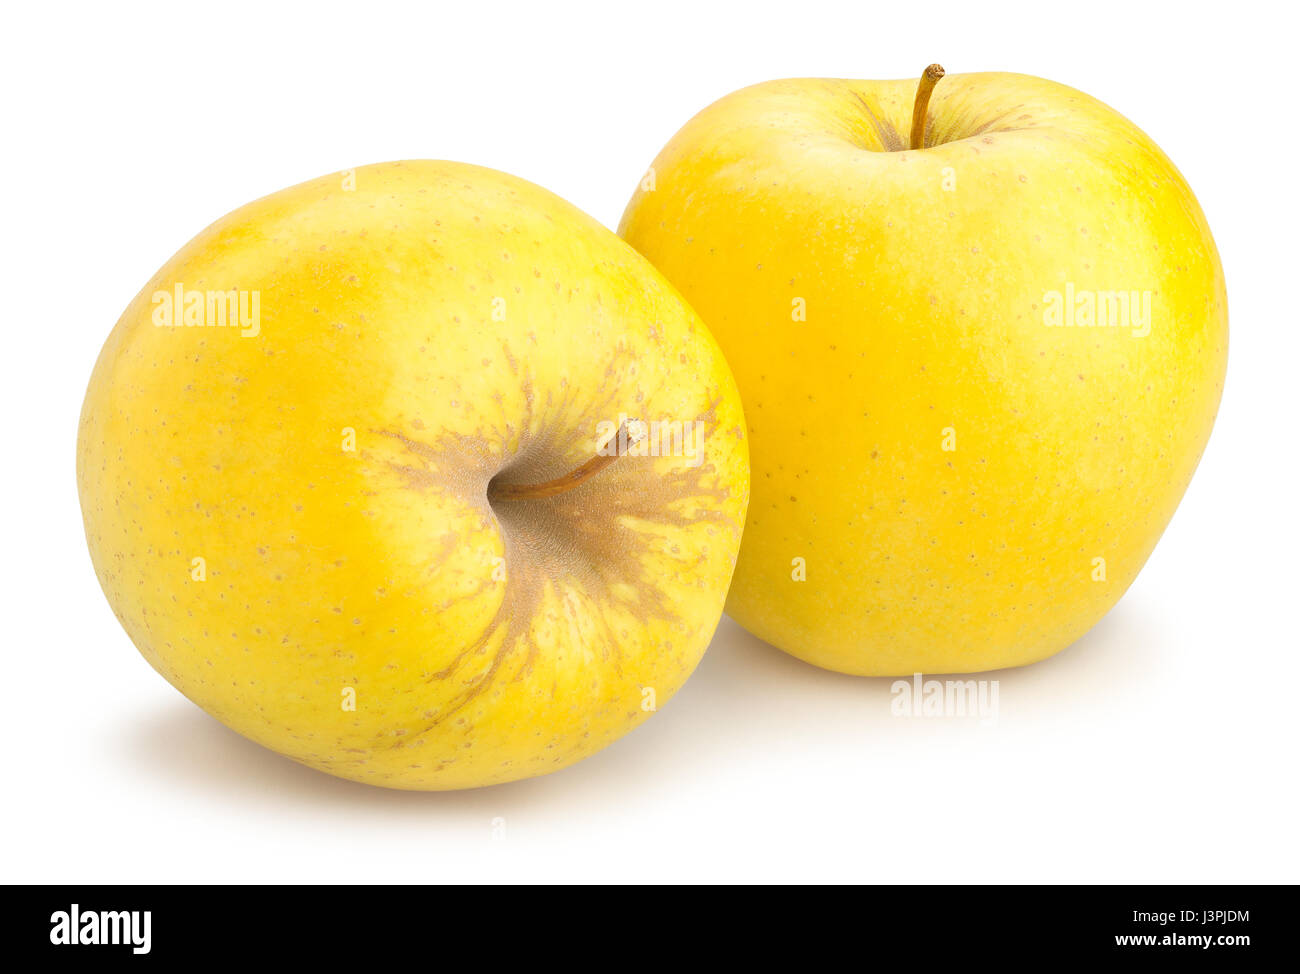 golden delicious apples isolated Stock Photo